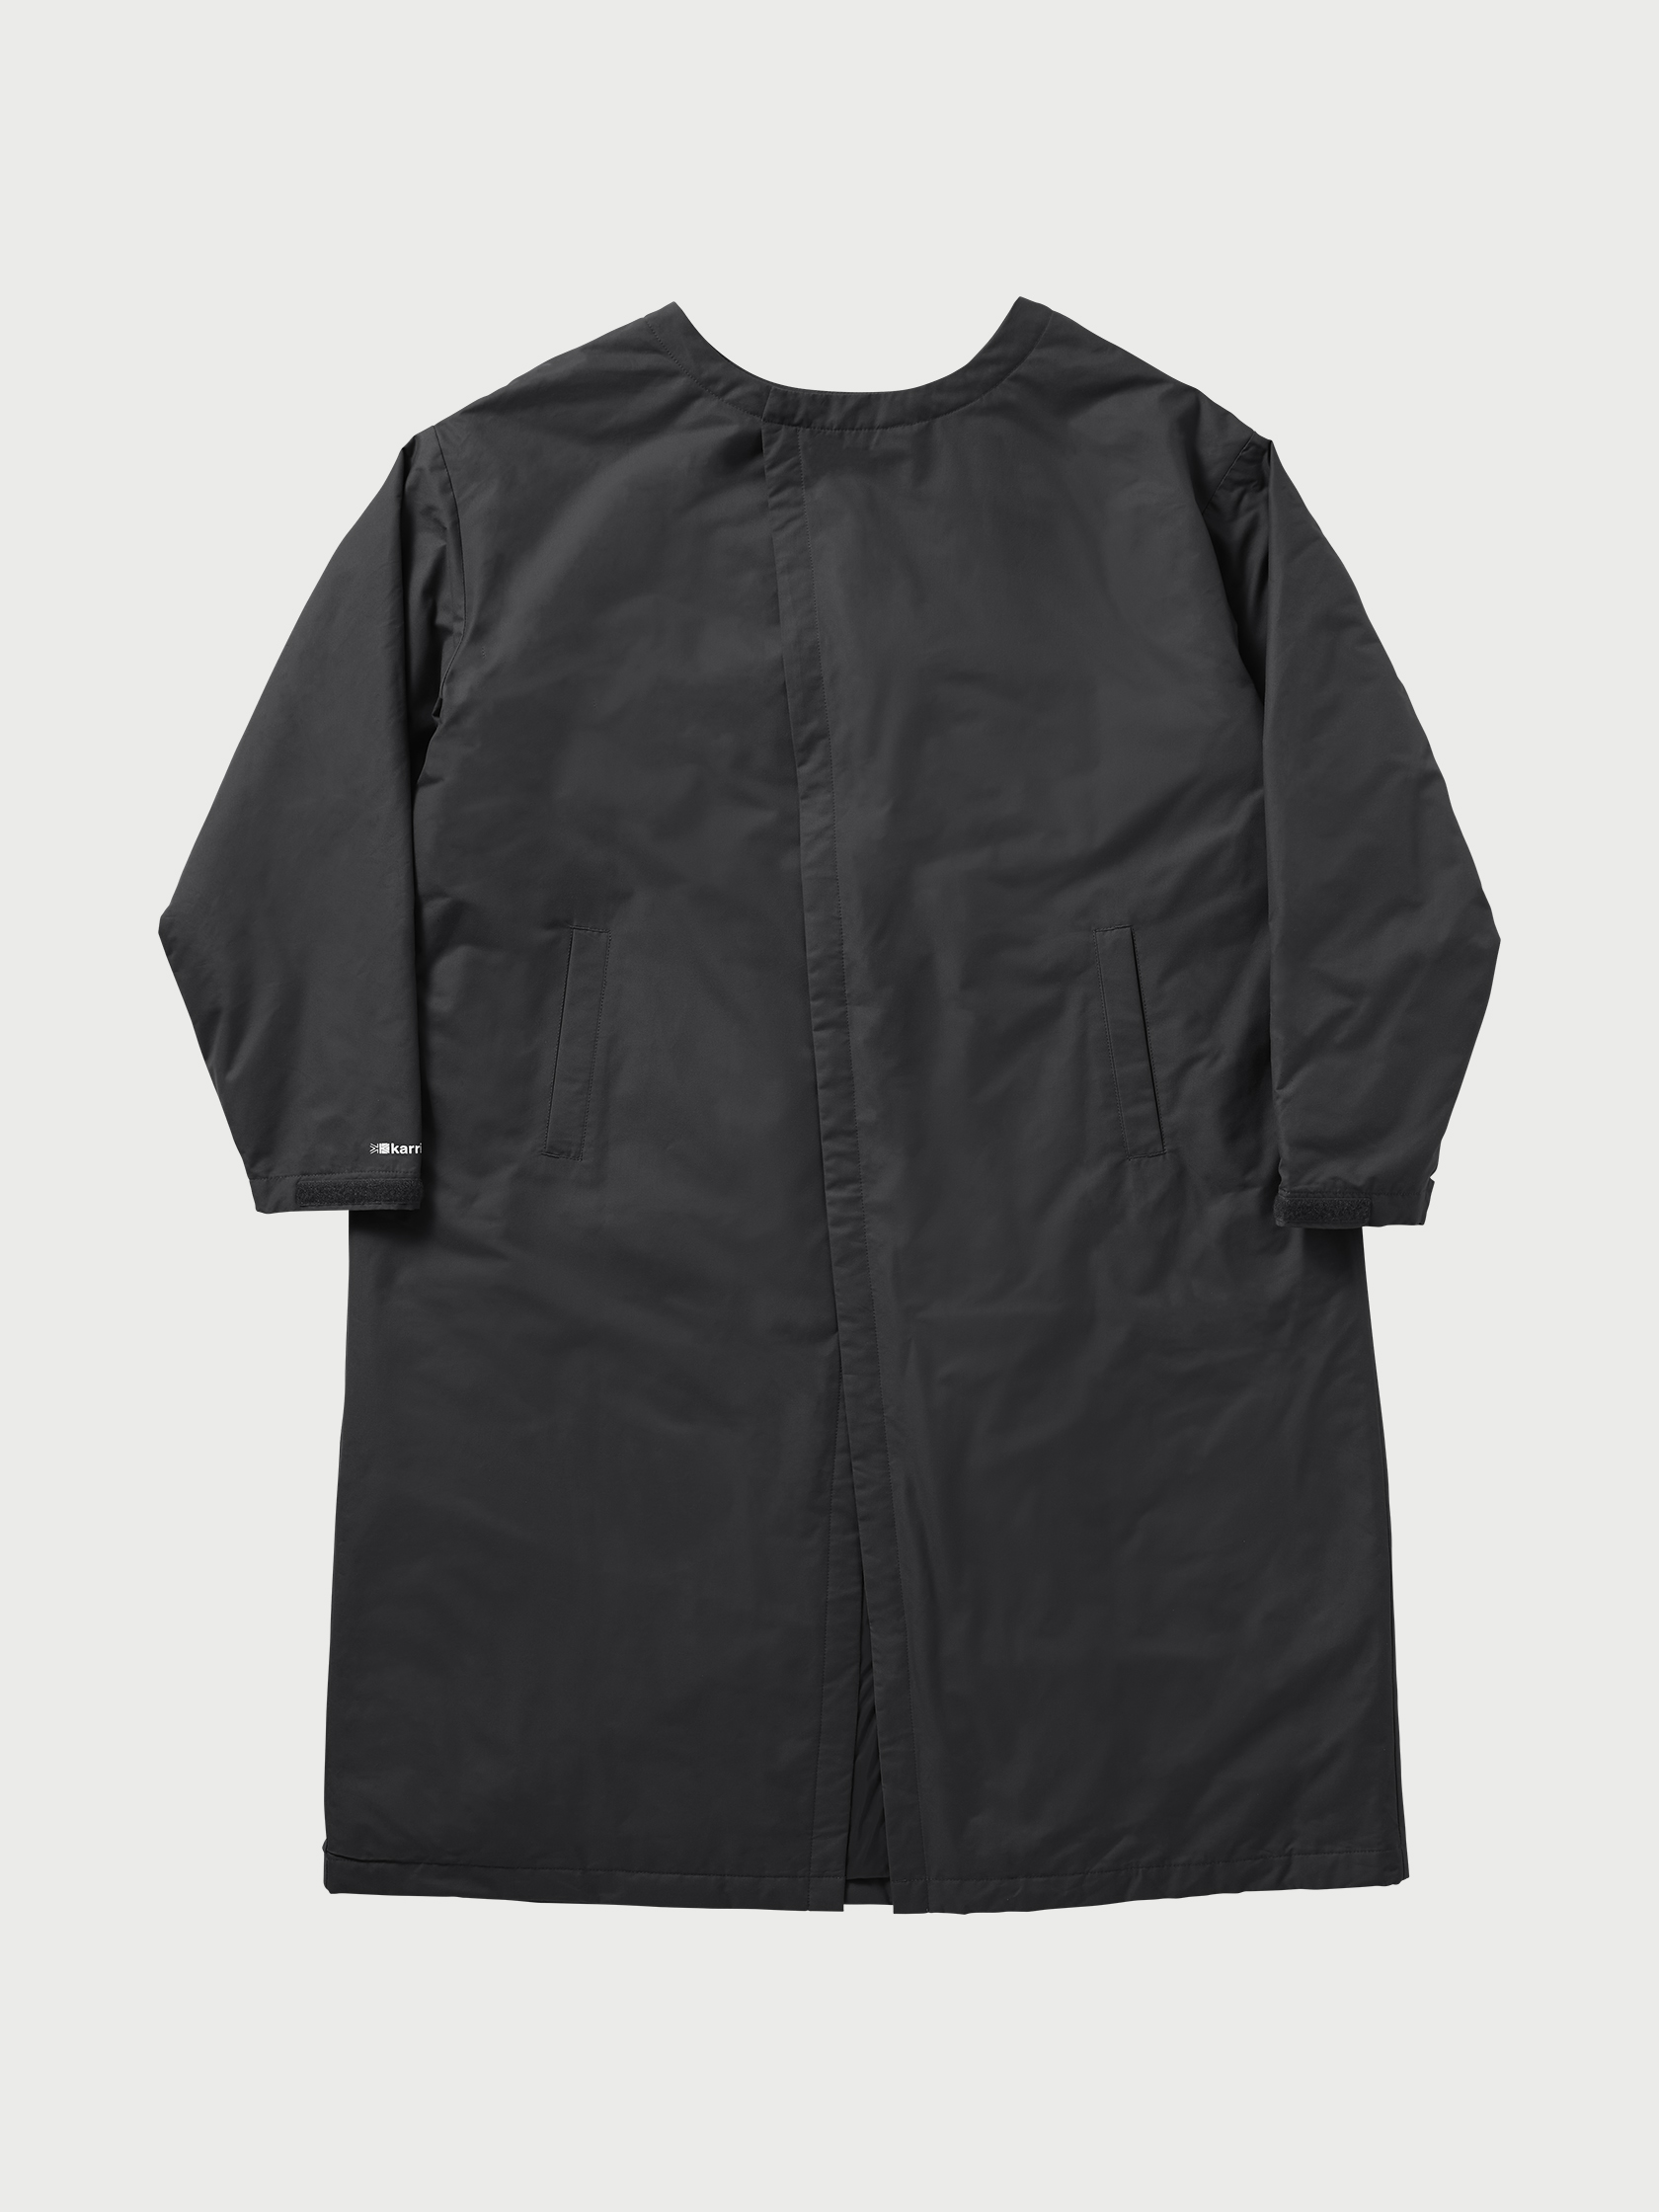 thermal camp 2 way jkt | karrimor カリマー | リュックサック 